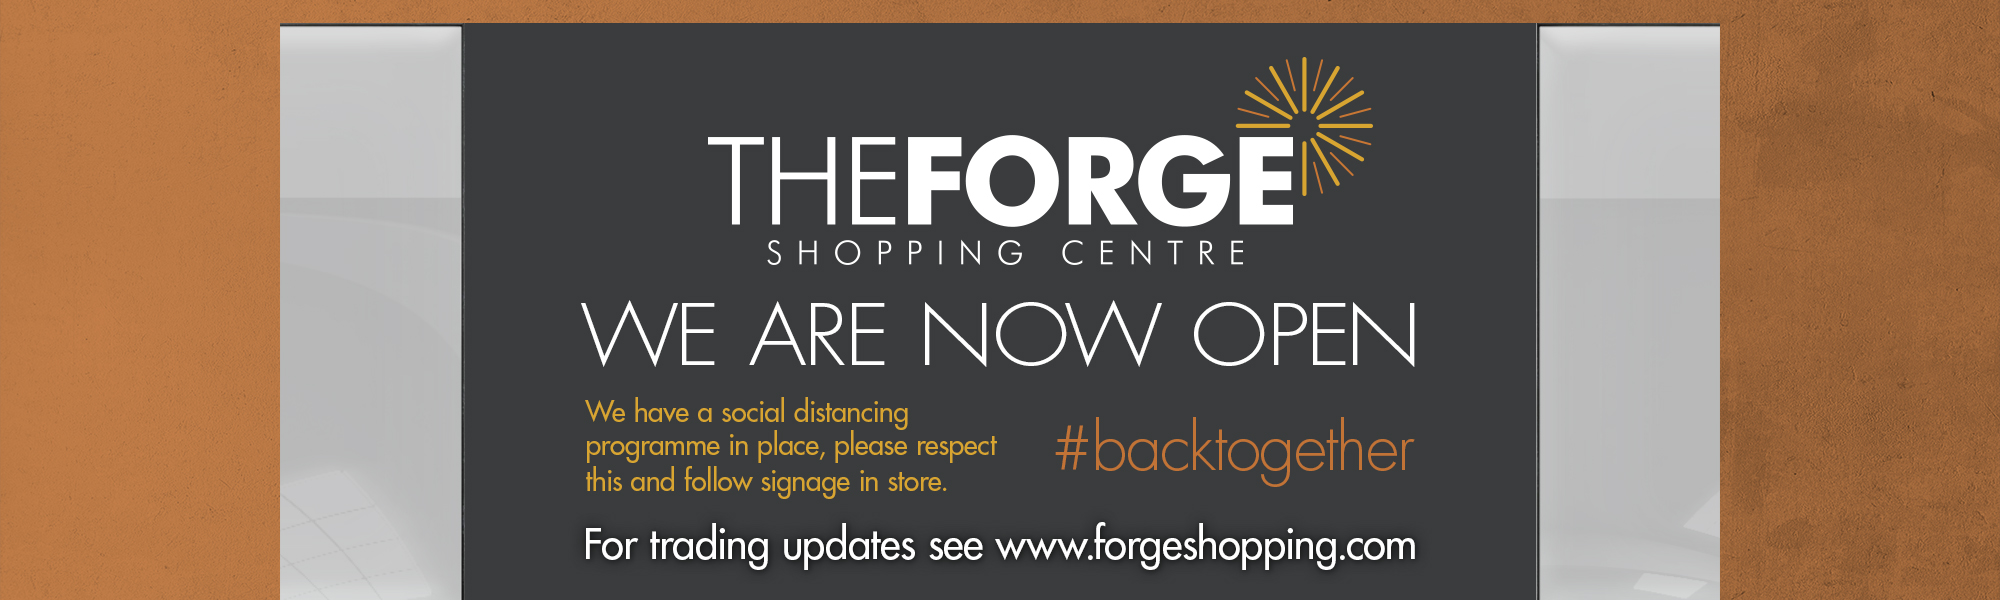 the-forge-reopening-website-banner-2000x600px